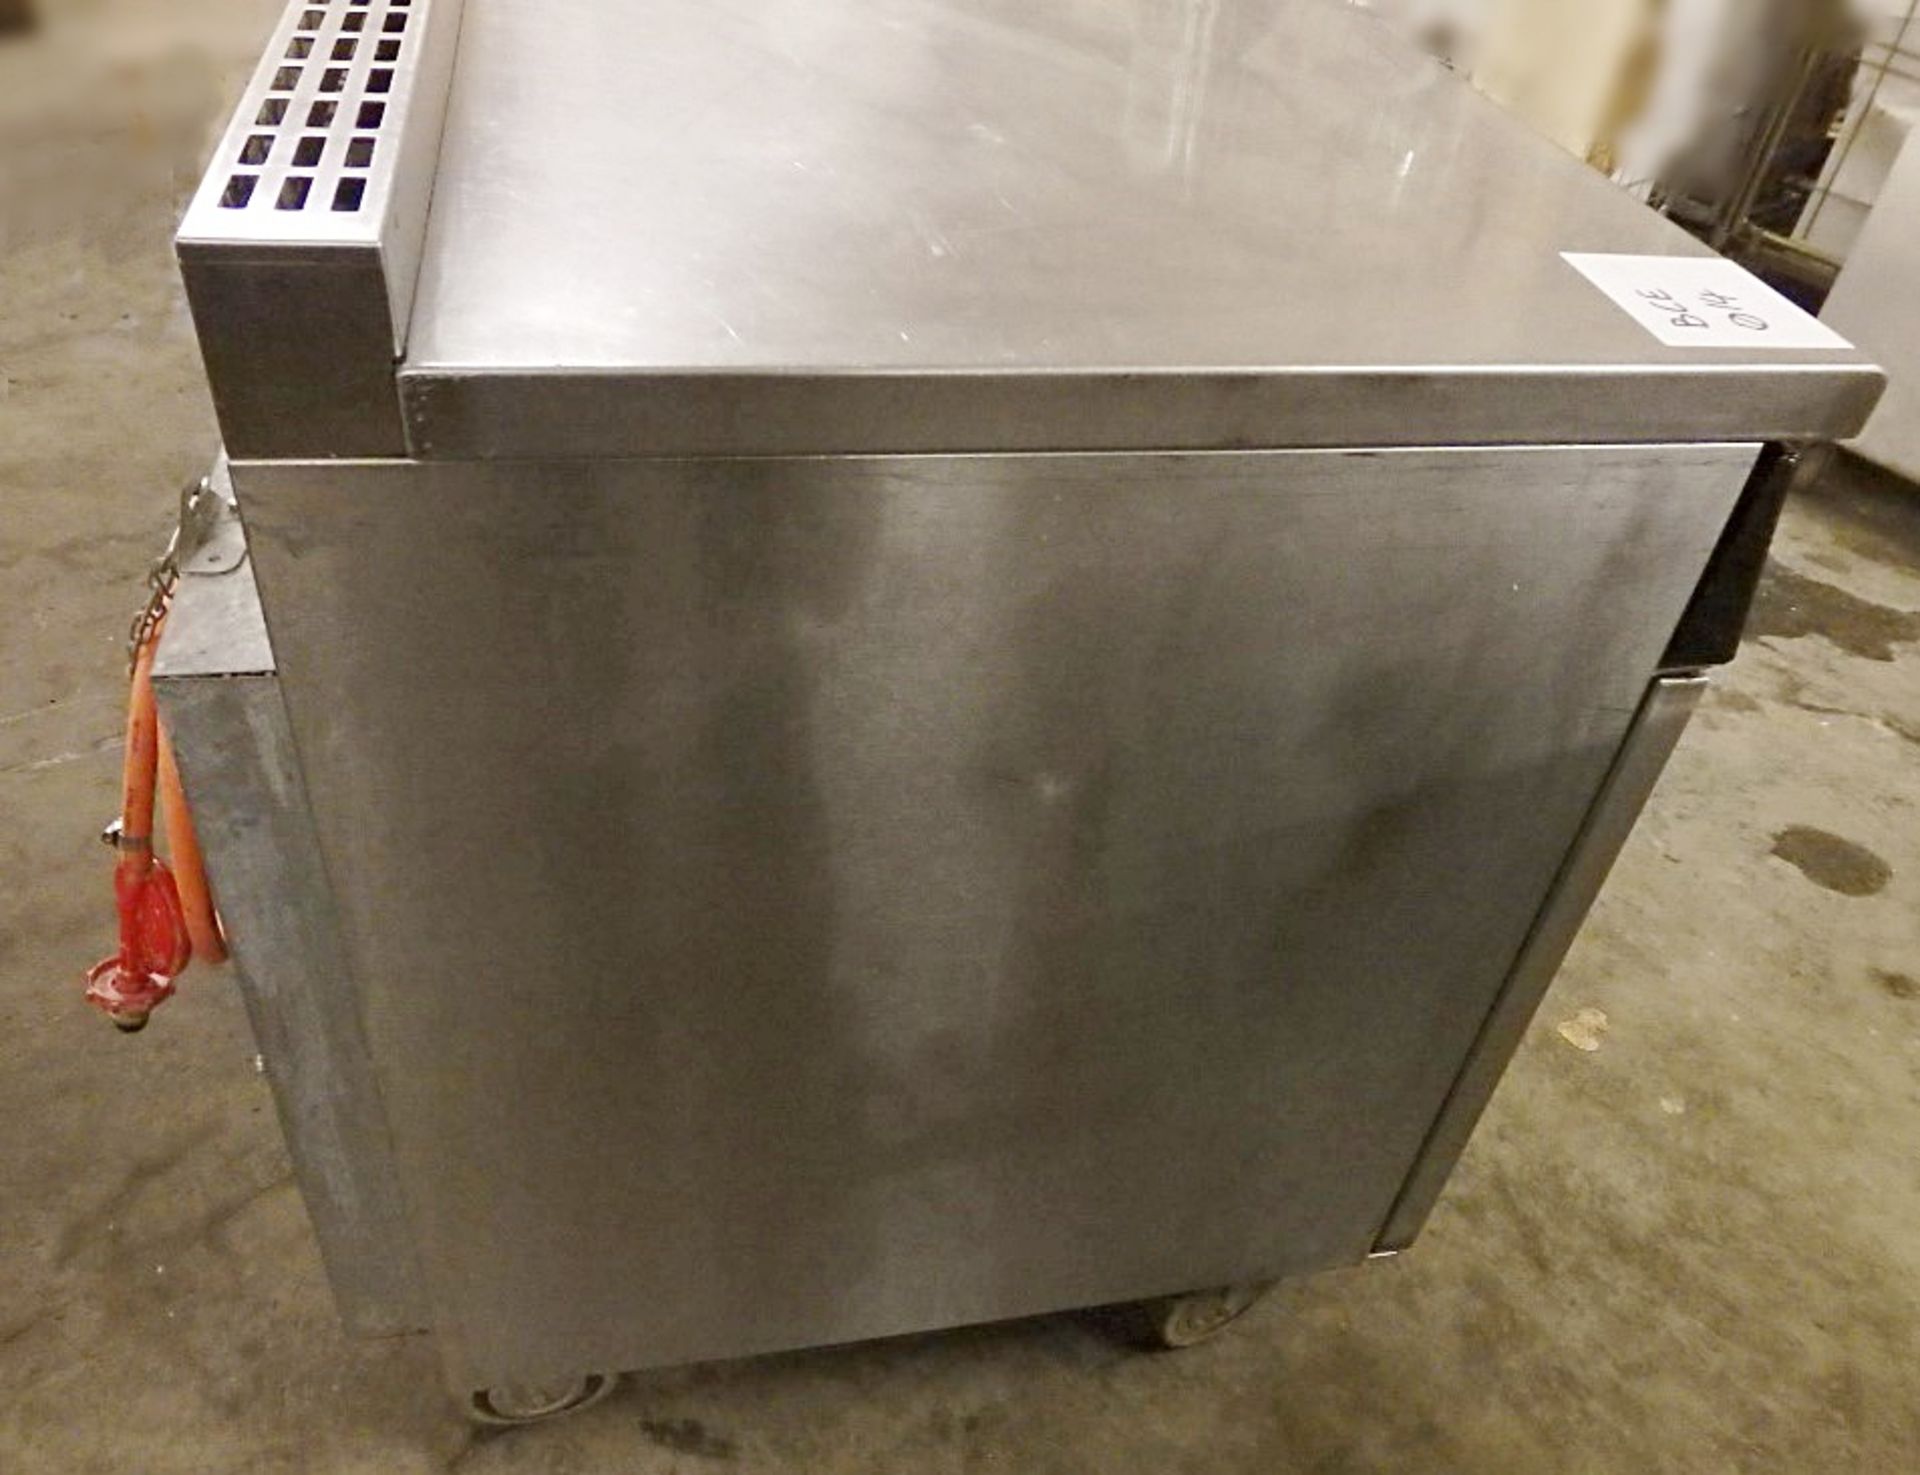 1 x Commercial "Bartlett Yeoman" Convection Gas Oven (Model E37G900) - Dimensions: W x D x Hcm - - Image 8 of 11